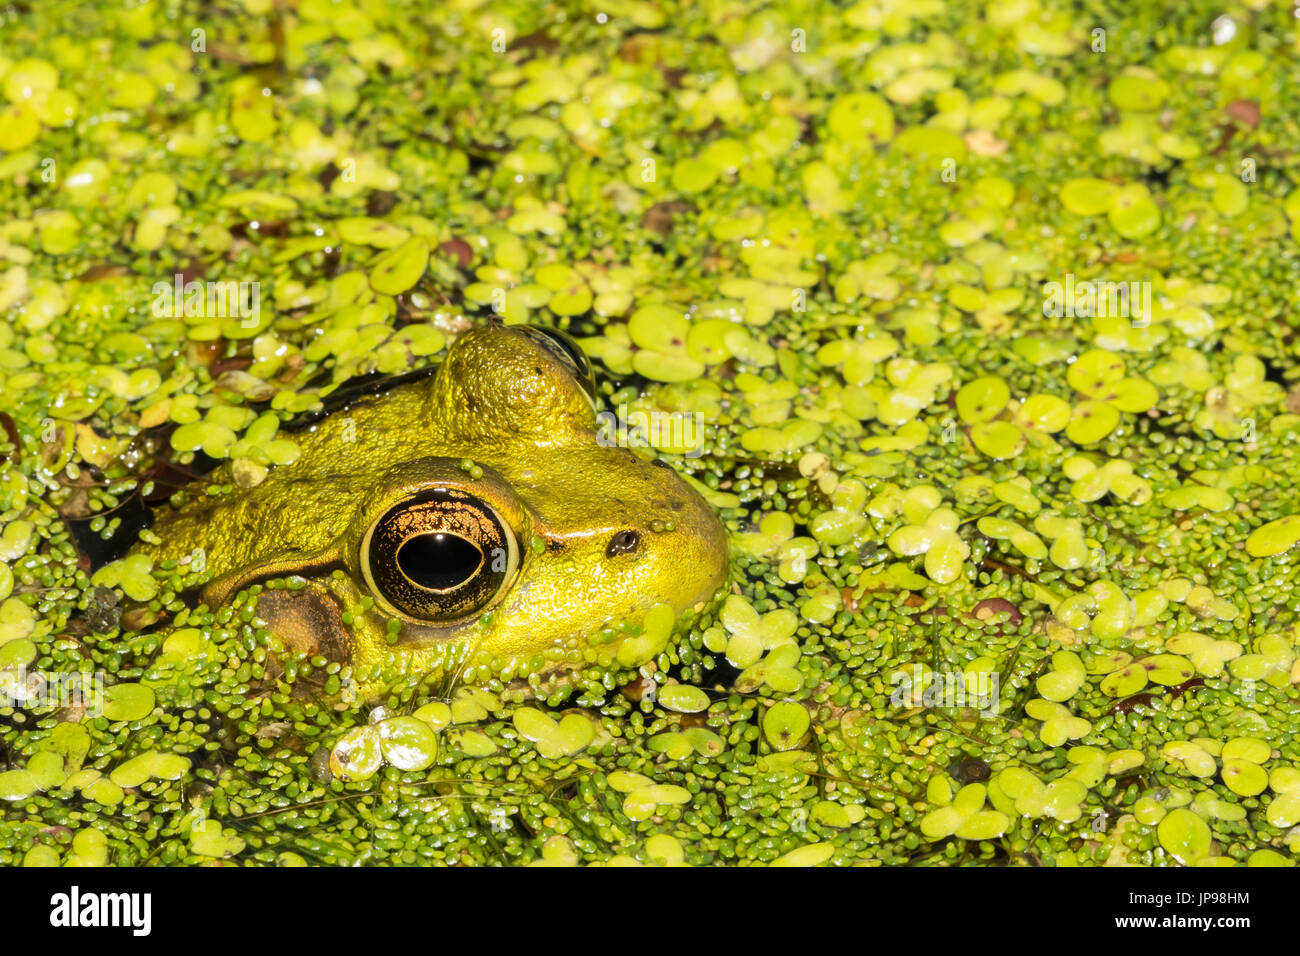 A close up of a Green Frog hiding in a pond covered with duck weed. Stock Photo